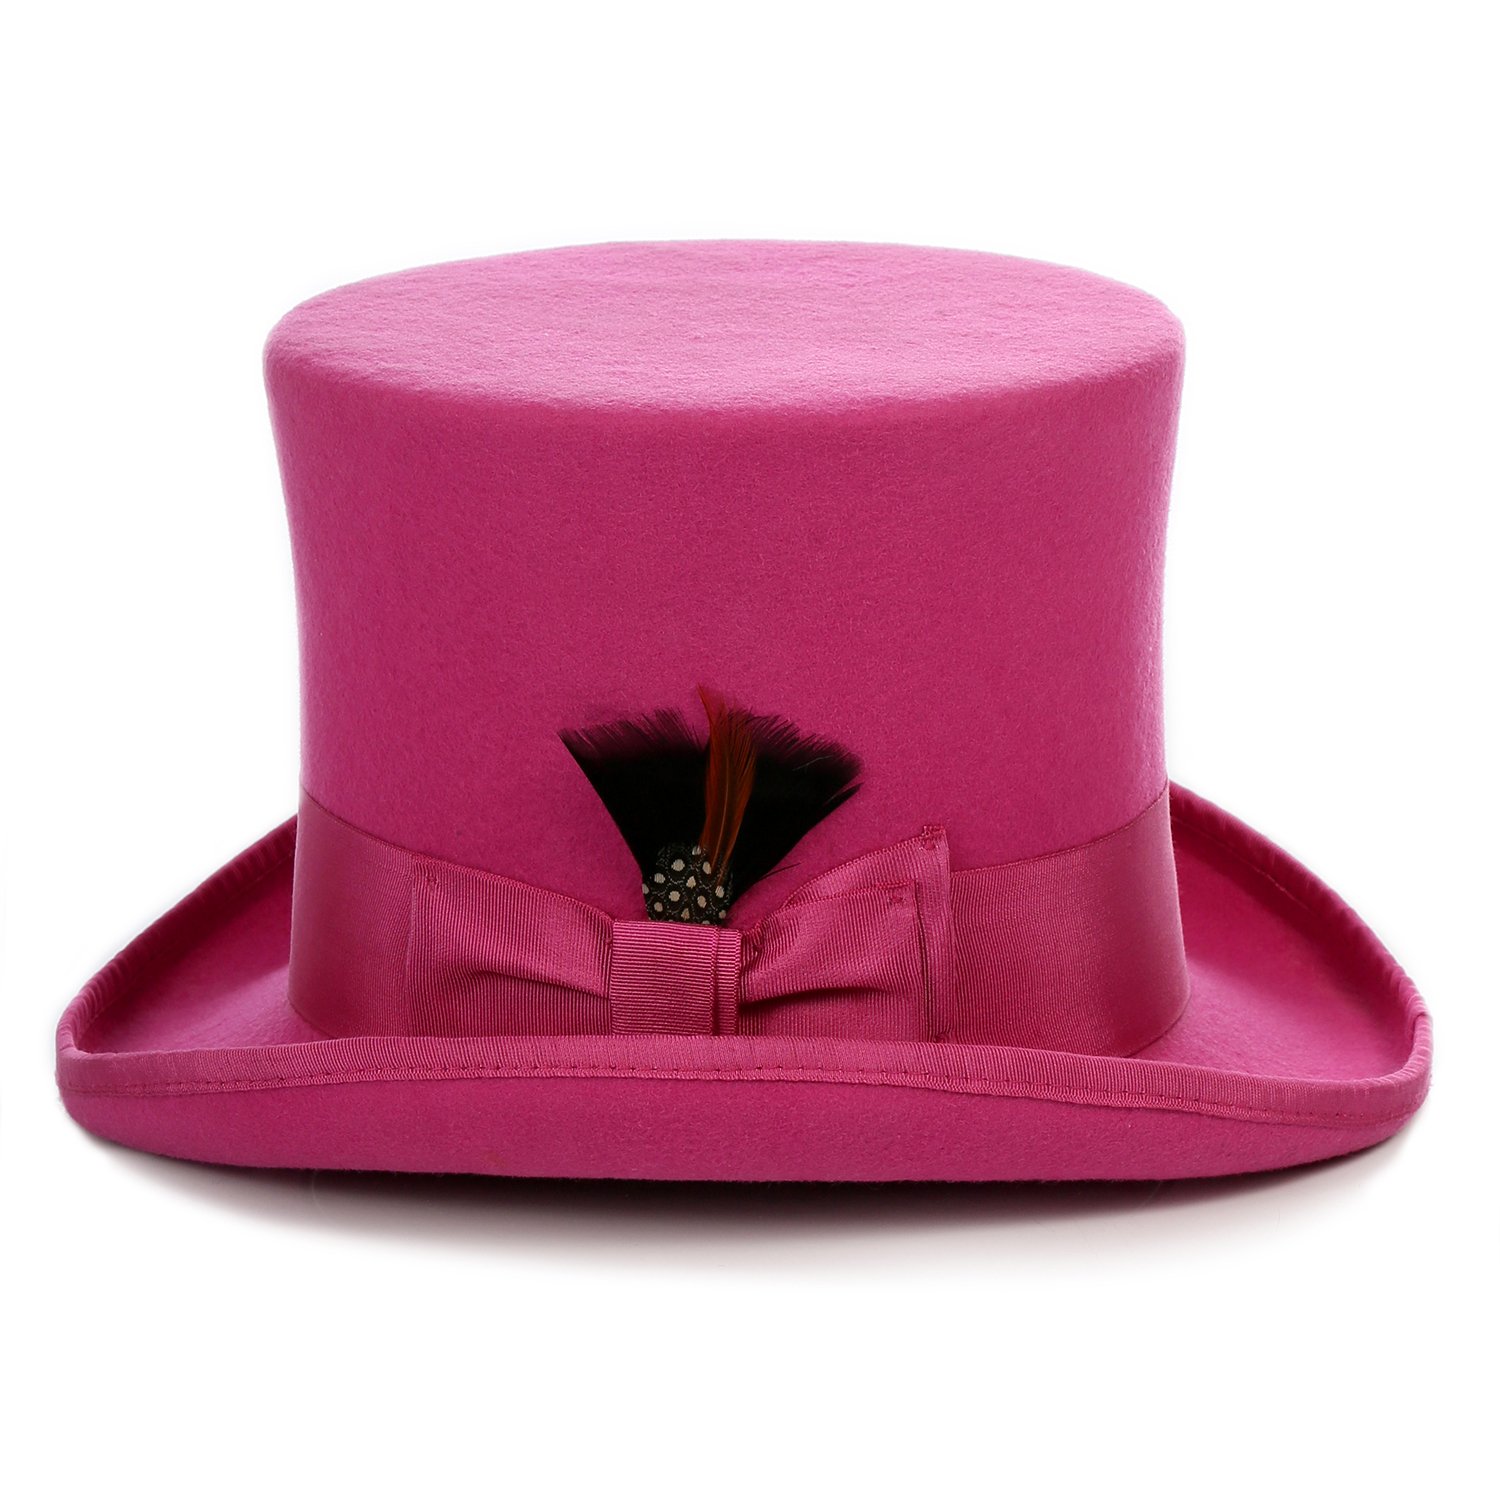 Ferrecci Satin Lined Fuchsia Wool Top Hat with Grosgrain Ribbon and  Removable Feather - Unisex, Men, Women (Large 59cm-7 3/8) - Walmart.com